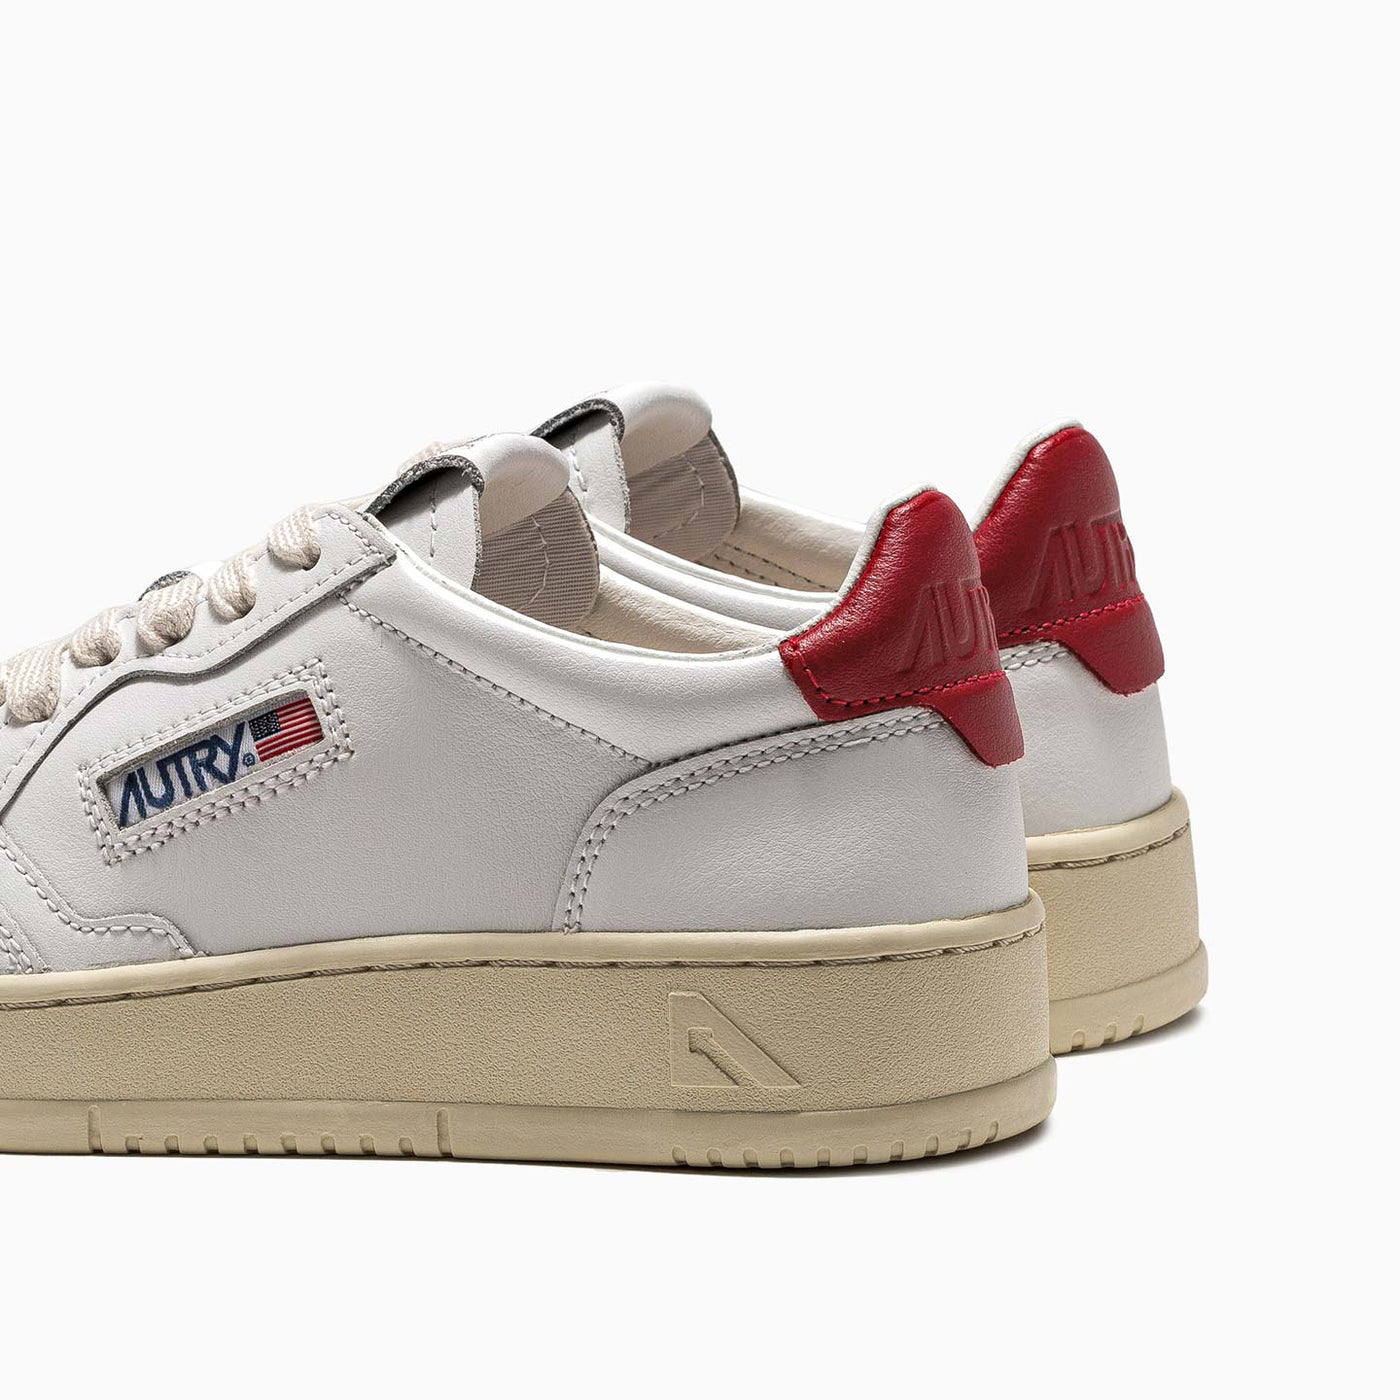 Autry Sneaker 01 Low Man Leather White Red